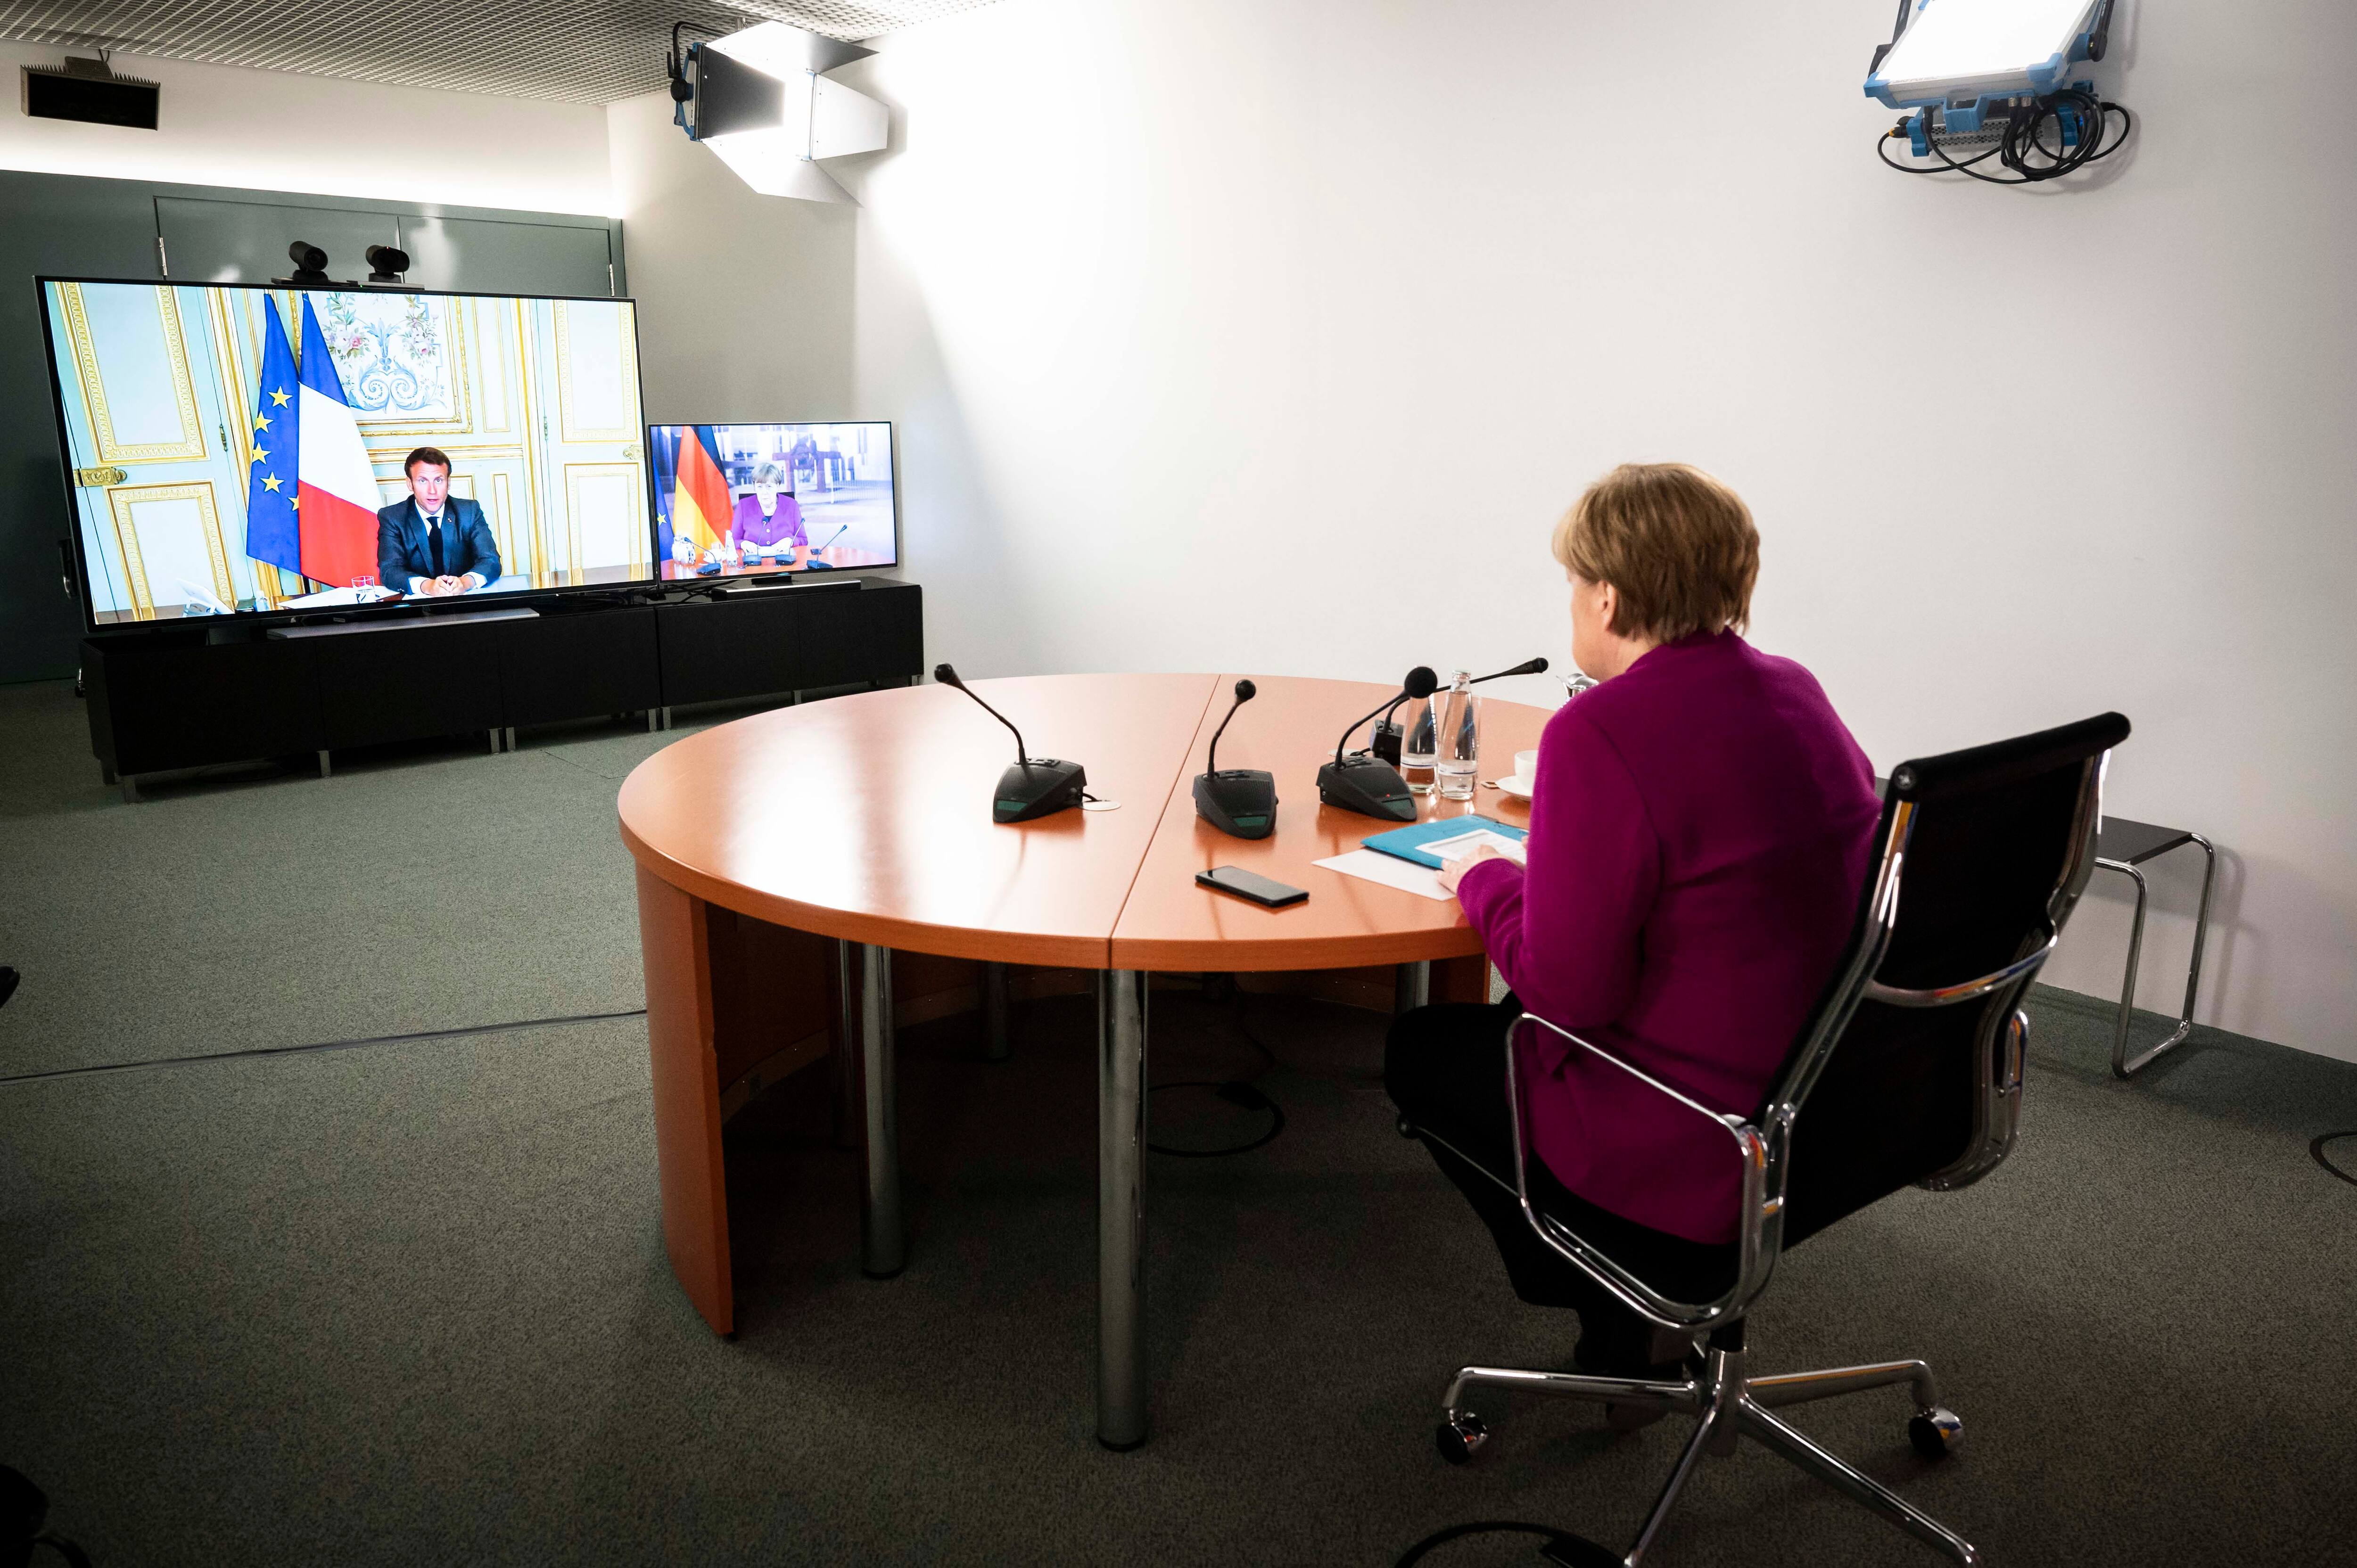 BERLIN, GERMANY - MAY 18, 2020:  In this handout photo provided by the German Government Press Office (BPA), German Chancellor Angela Merkel is seen during a video conference with French President Emmanuel Macron at the Chancellor's Office on May 18, 2020 in Berlin, Germany. (Photo by Sandra Steins/Bundesregierung via Getty Images)